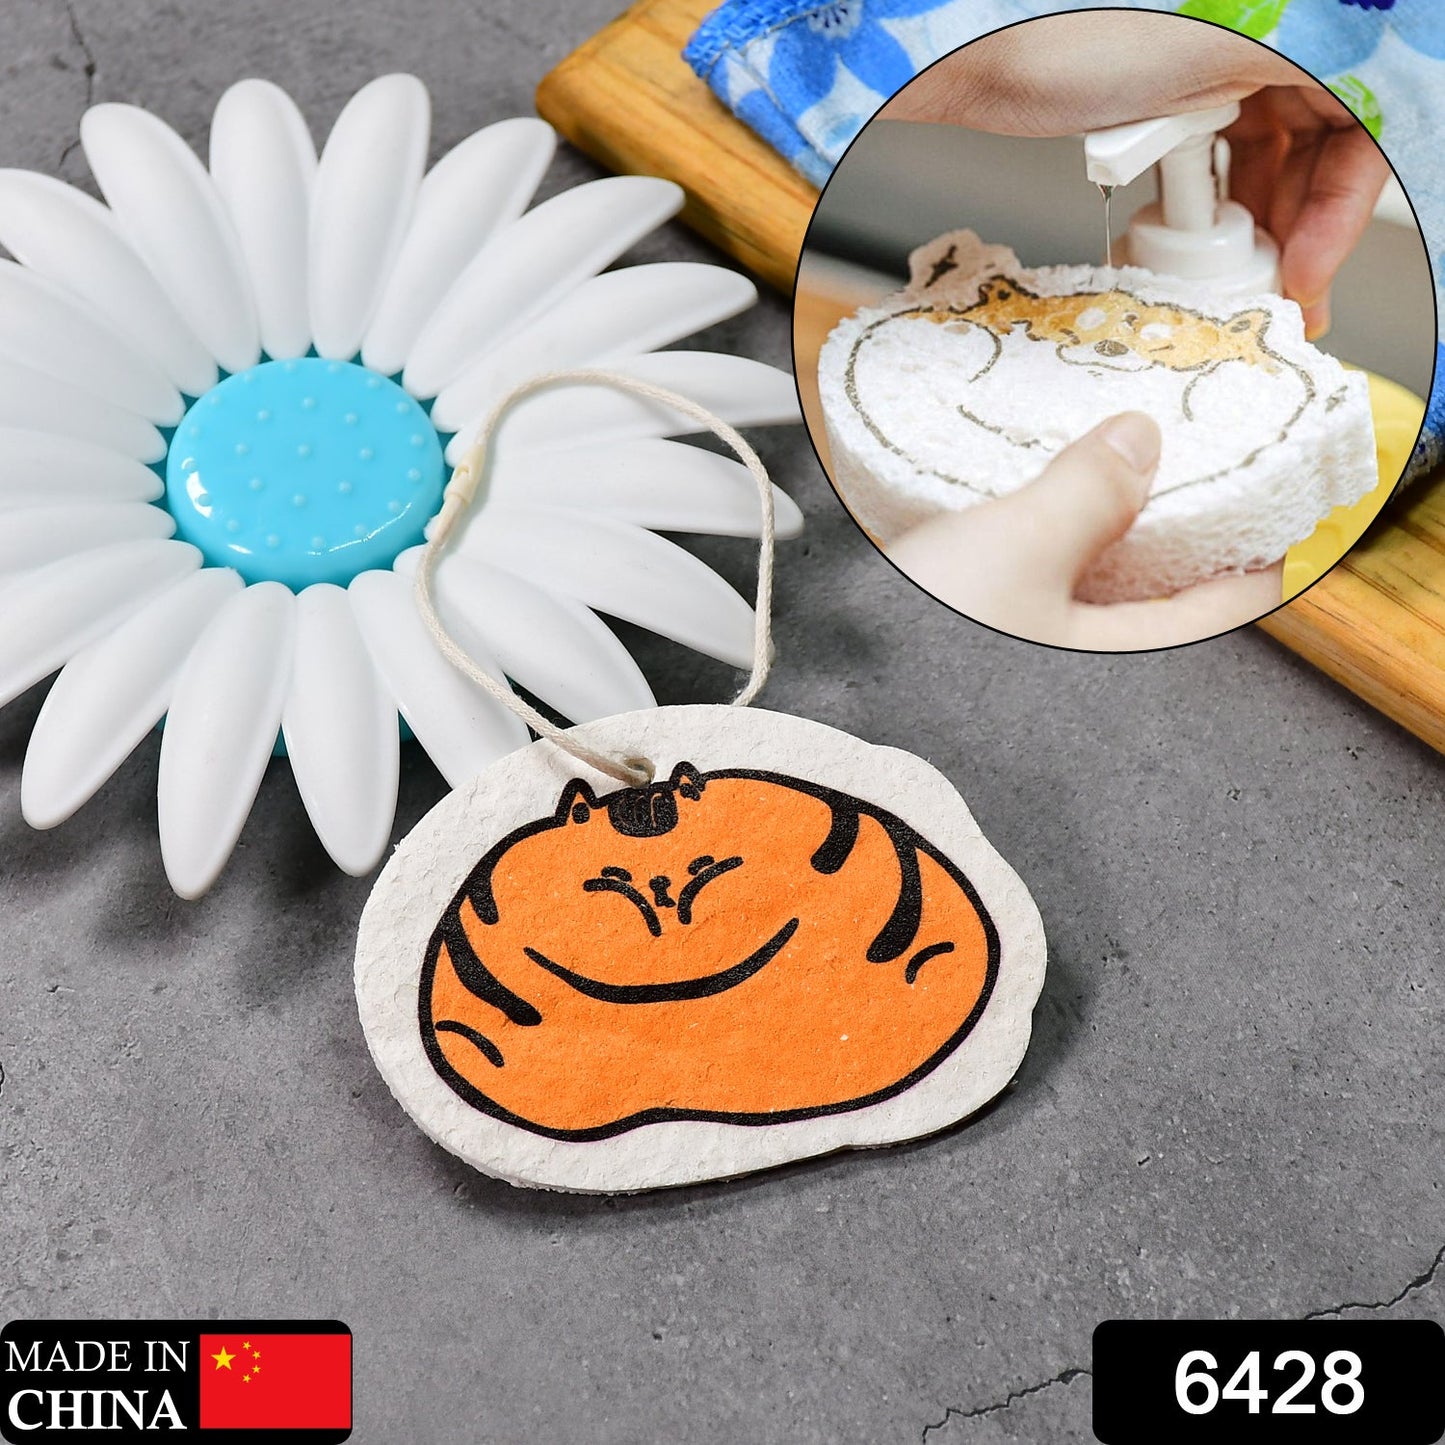 6428 Compressed Wood Pulp Sponge. Creative Cartoon Design Scouring Pad Dishwashing Absorbing Pad. Kitchen Cleaning Tool. - SWASTIK CREATIONS The Trend Point SWASTIK CREATIONS The Trend Point